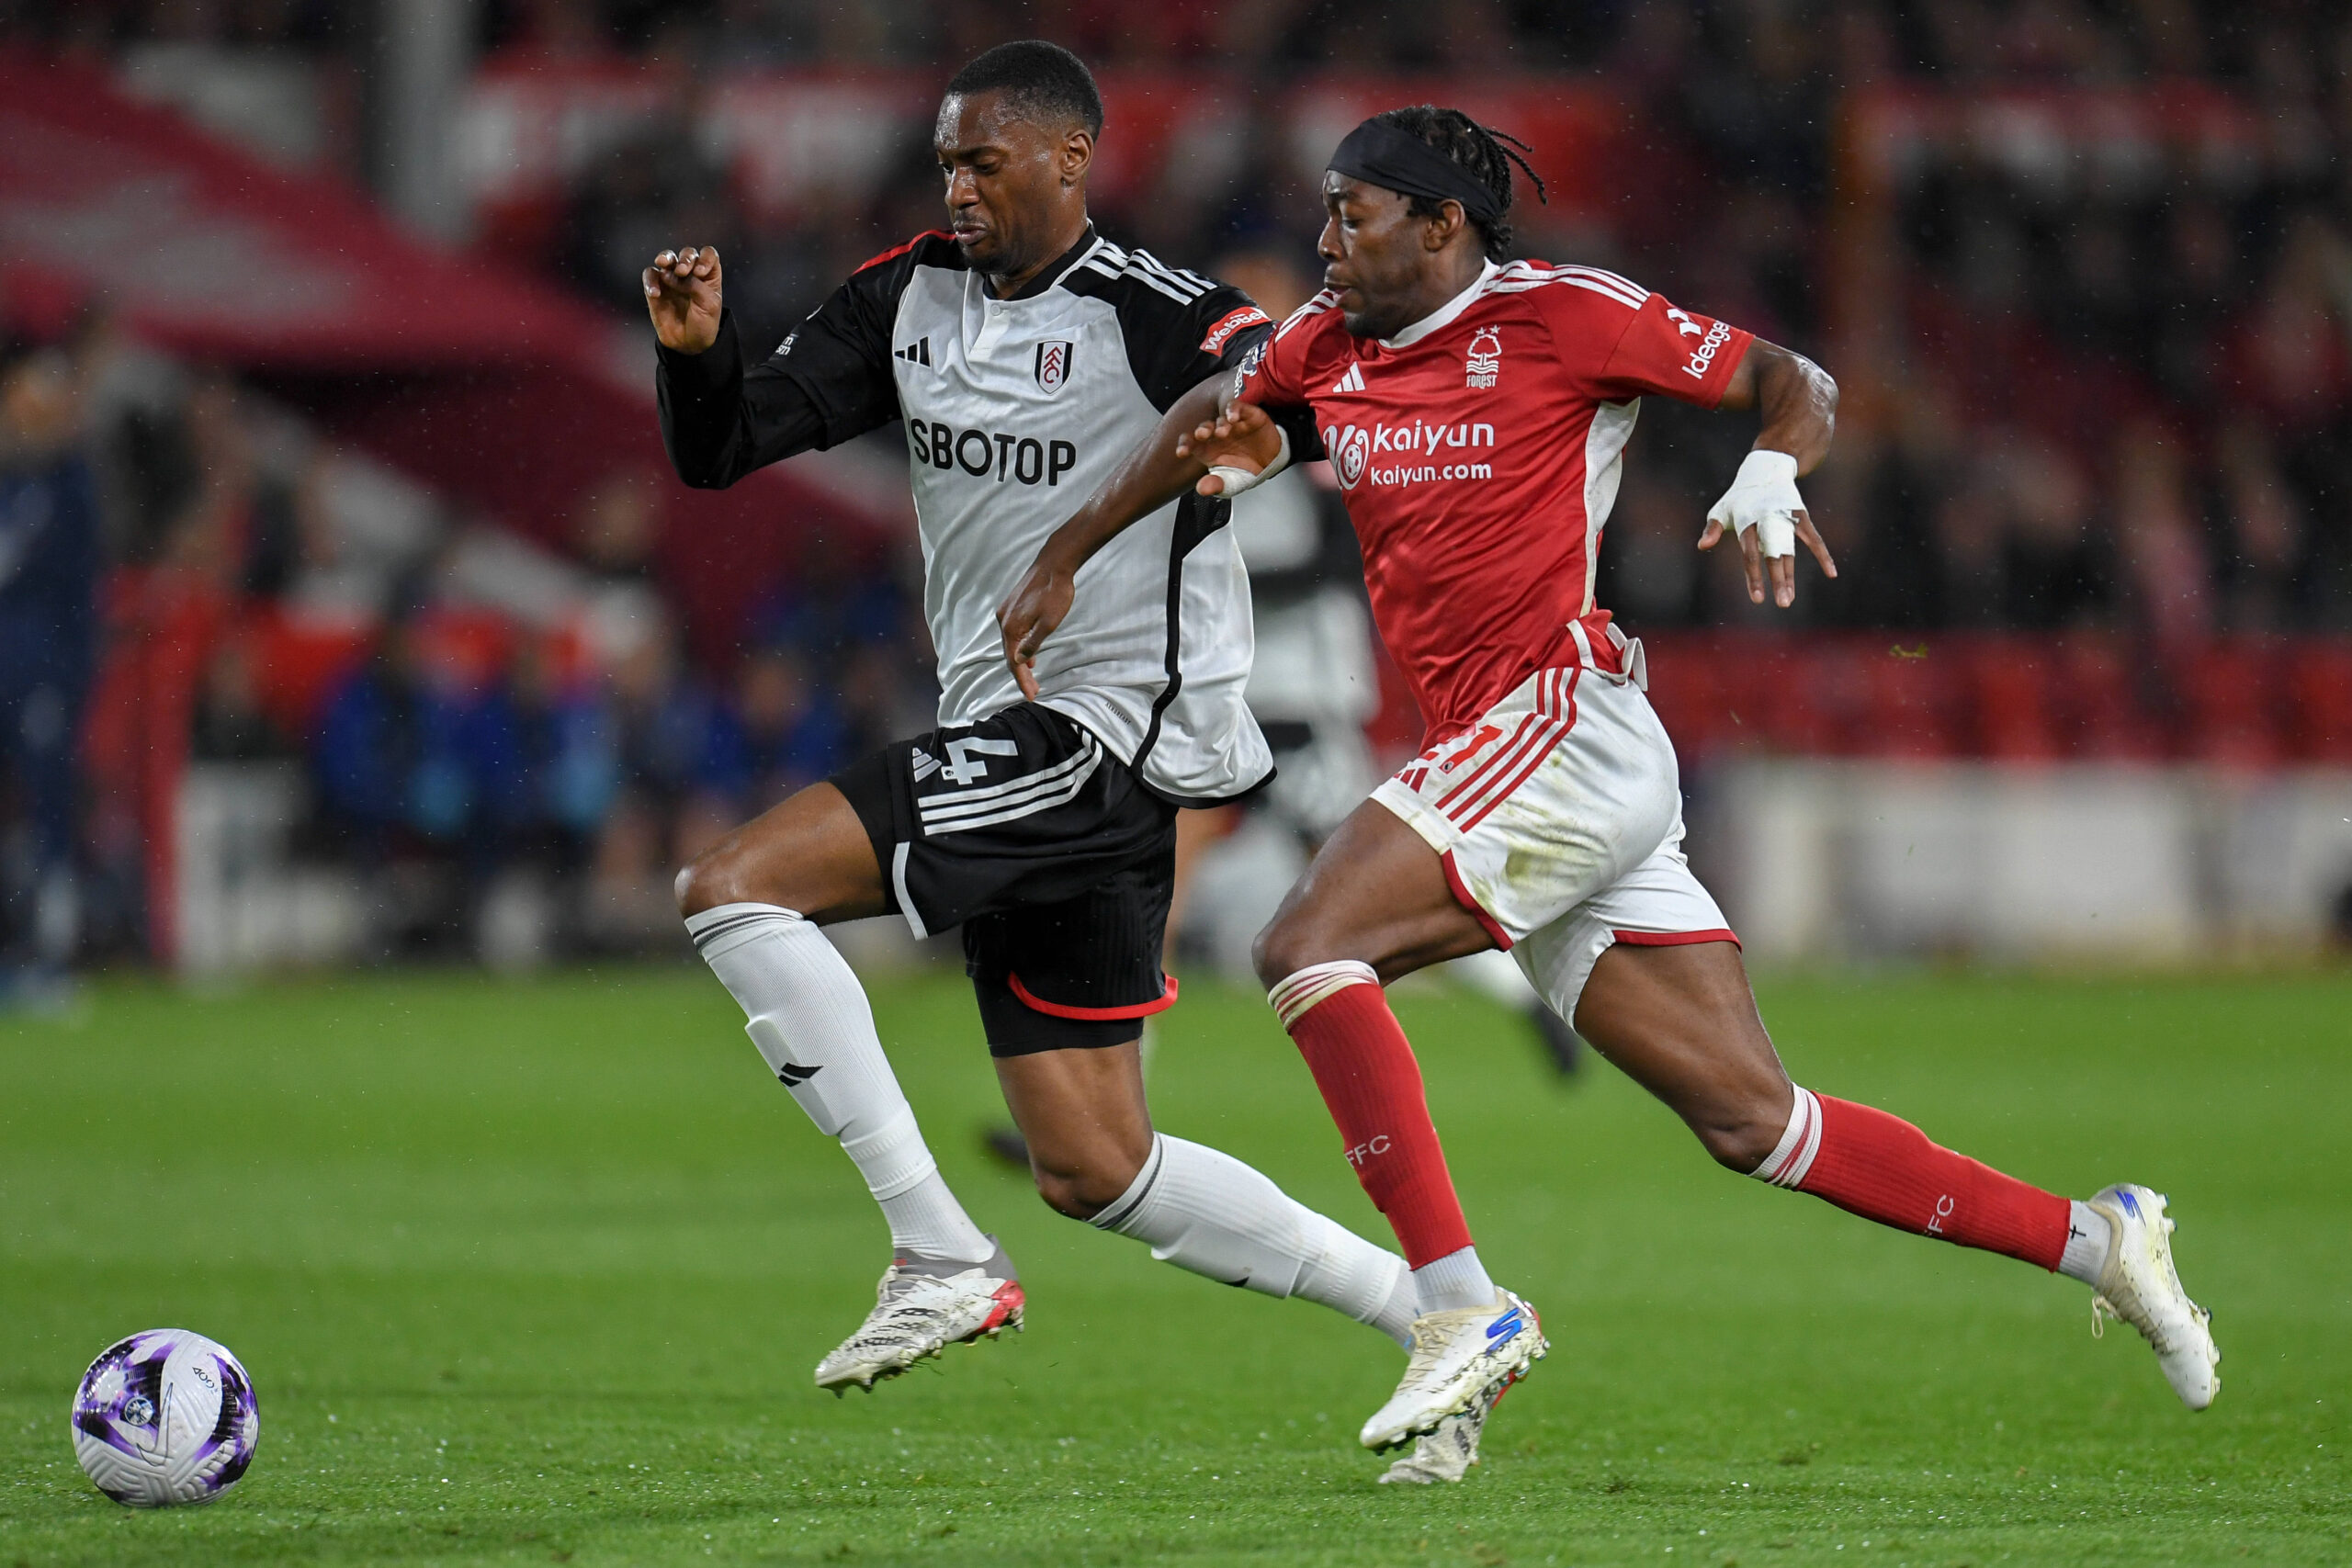 Fulham defender Tosin Adarabioyo battles for the ball with Nottigham Forest's Anthony Elanga